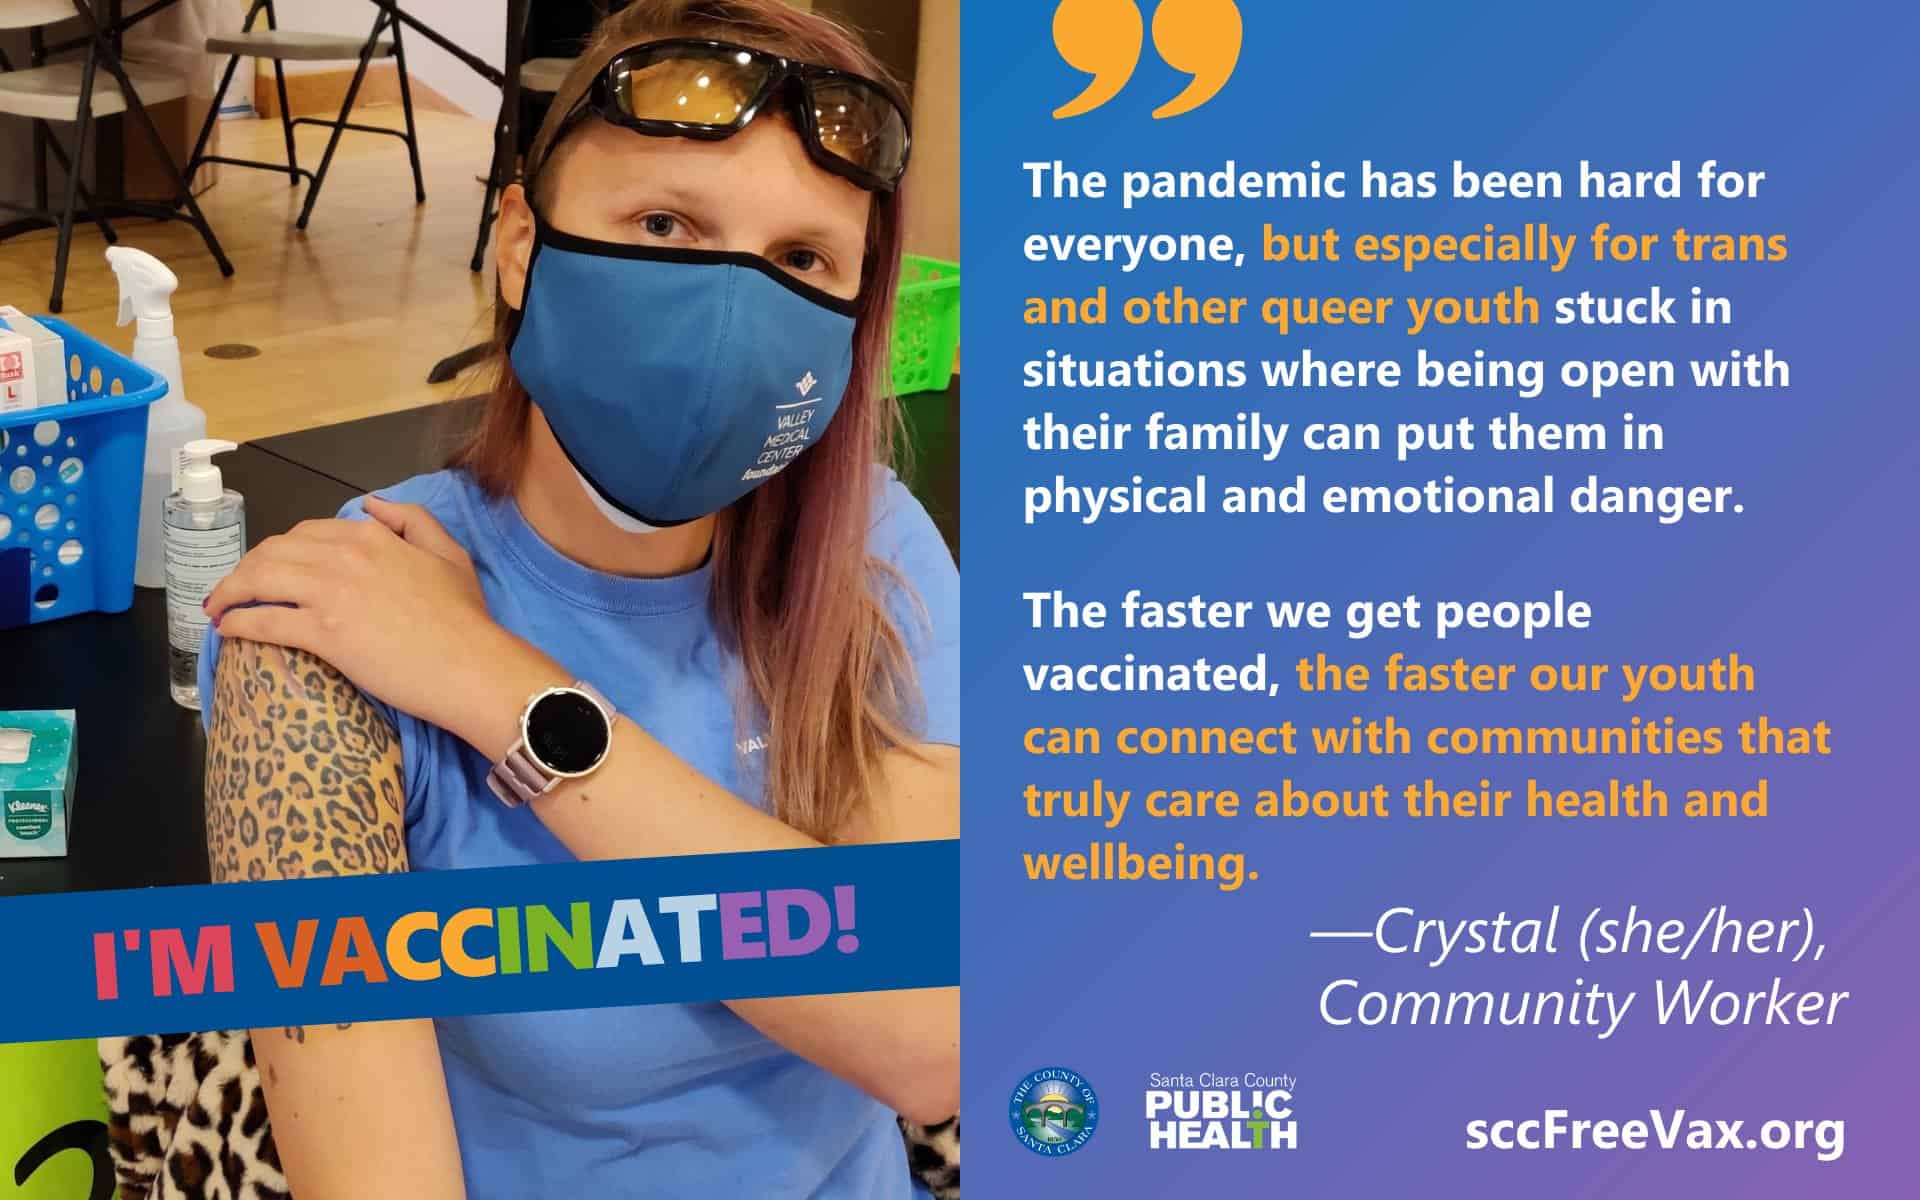 A testimonial from a community health worker on why she is getting the COVID-19 vaccine.